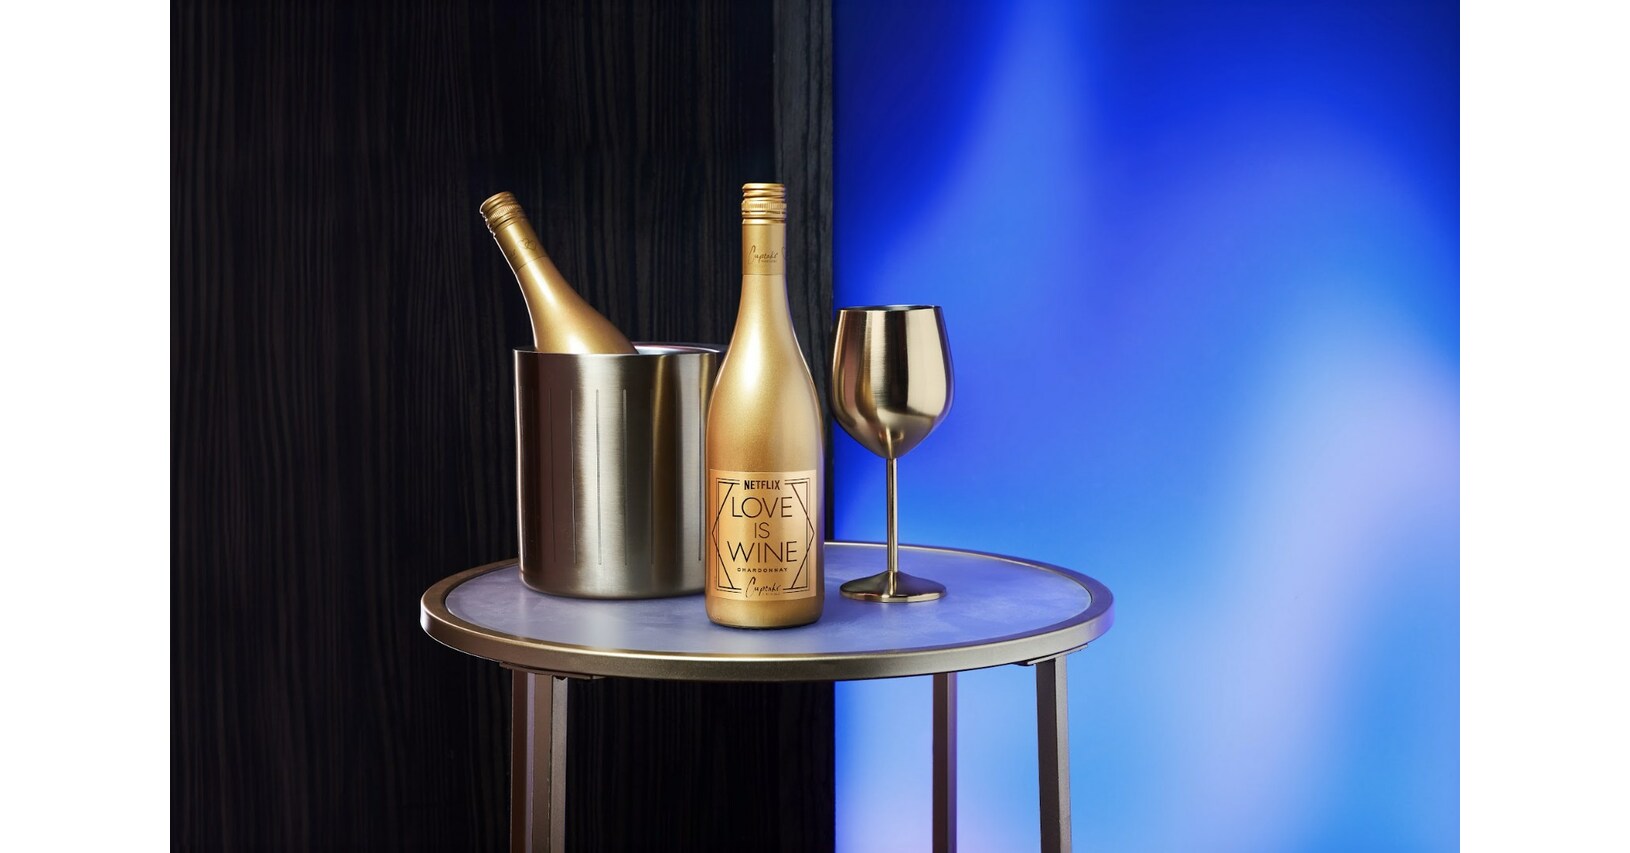 The Gold Wine Glasses From 'Love Is Blind' Are Only $25